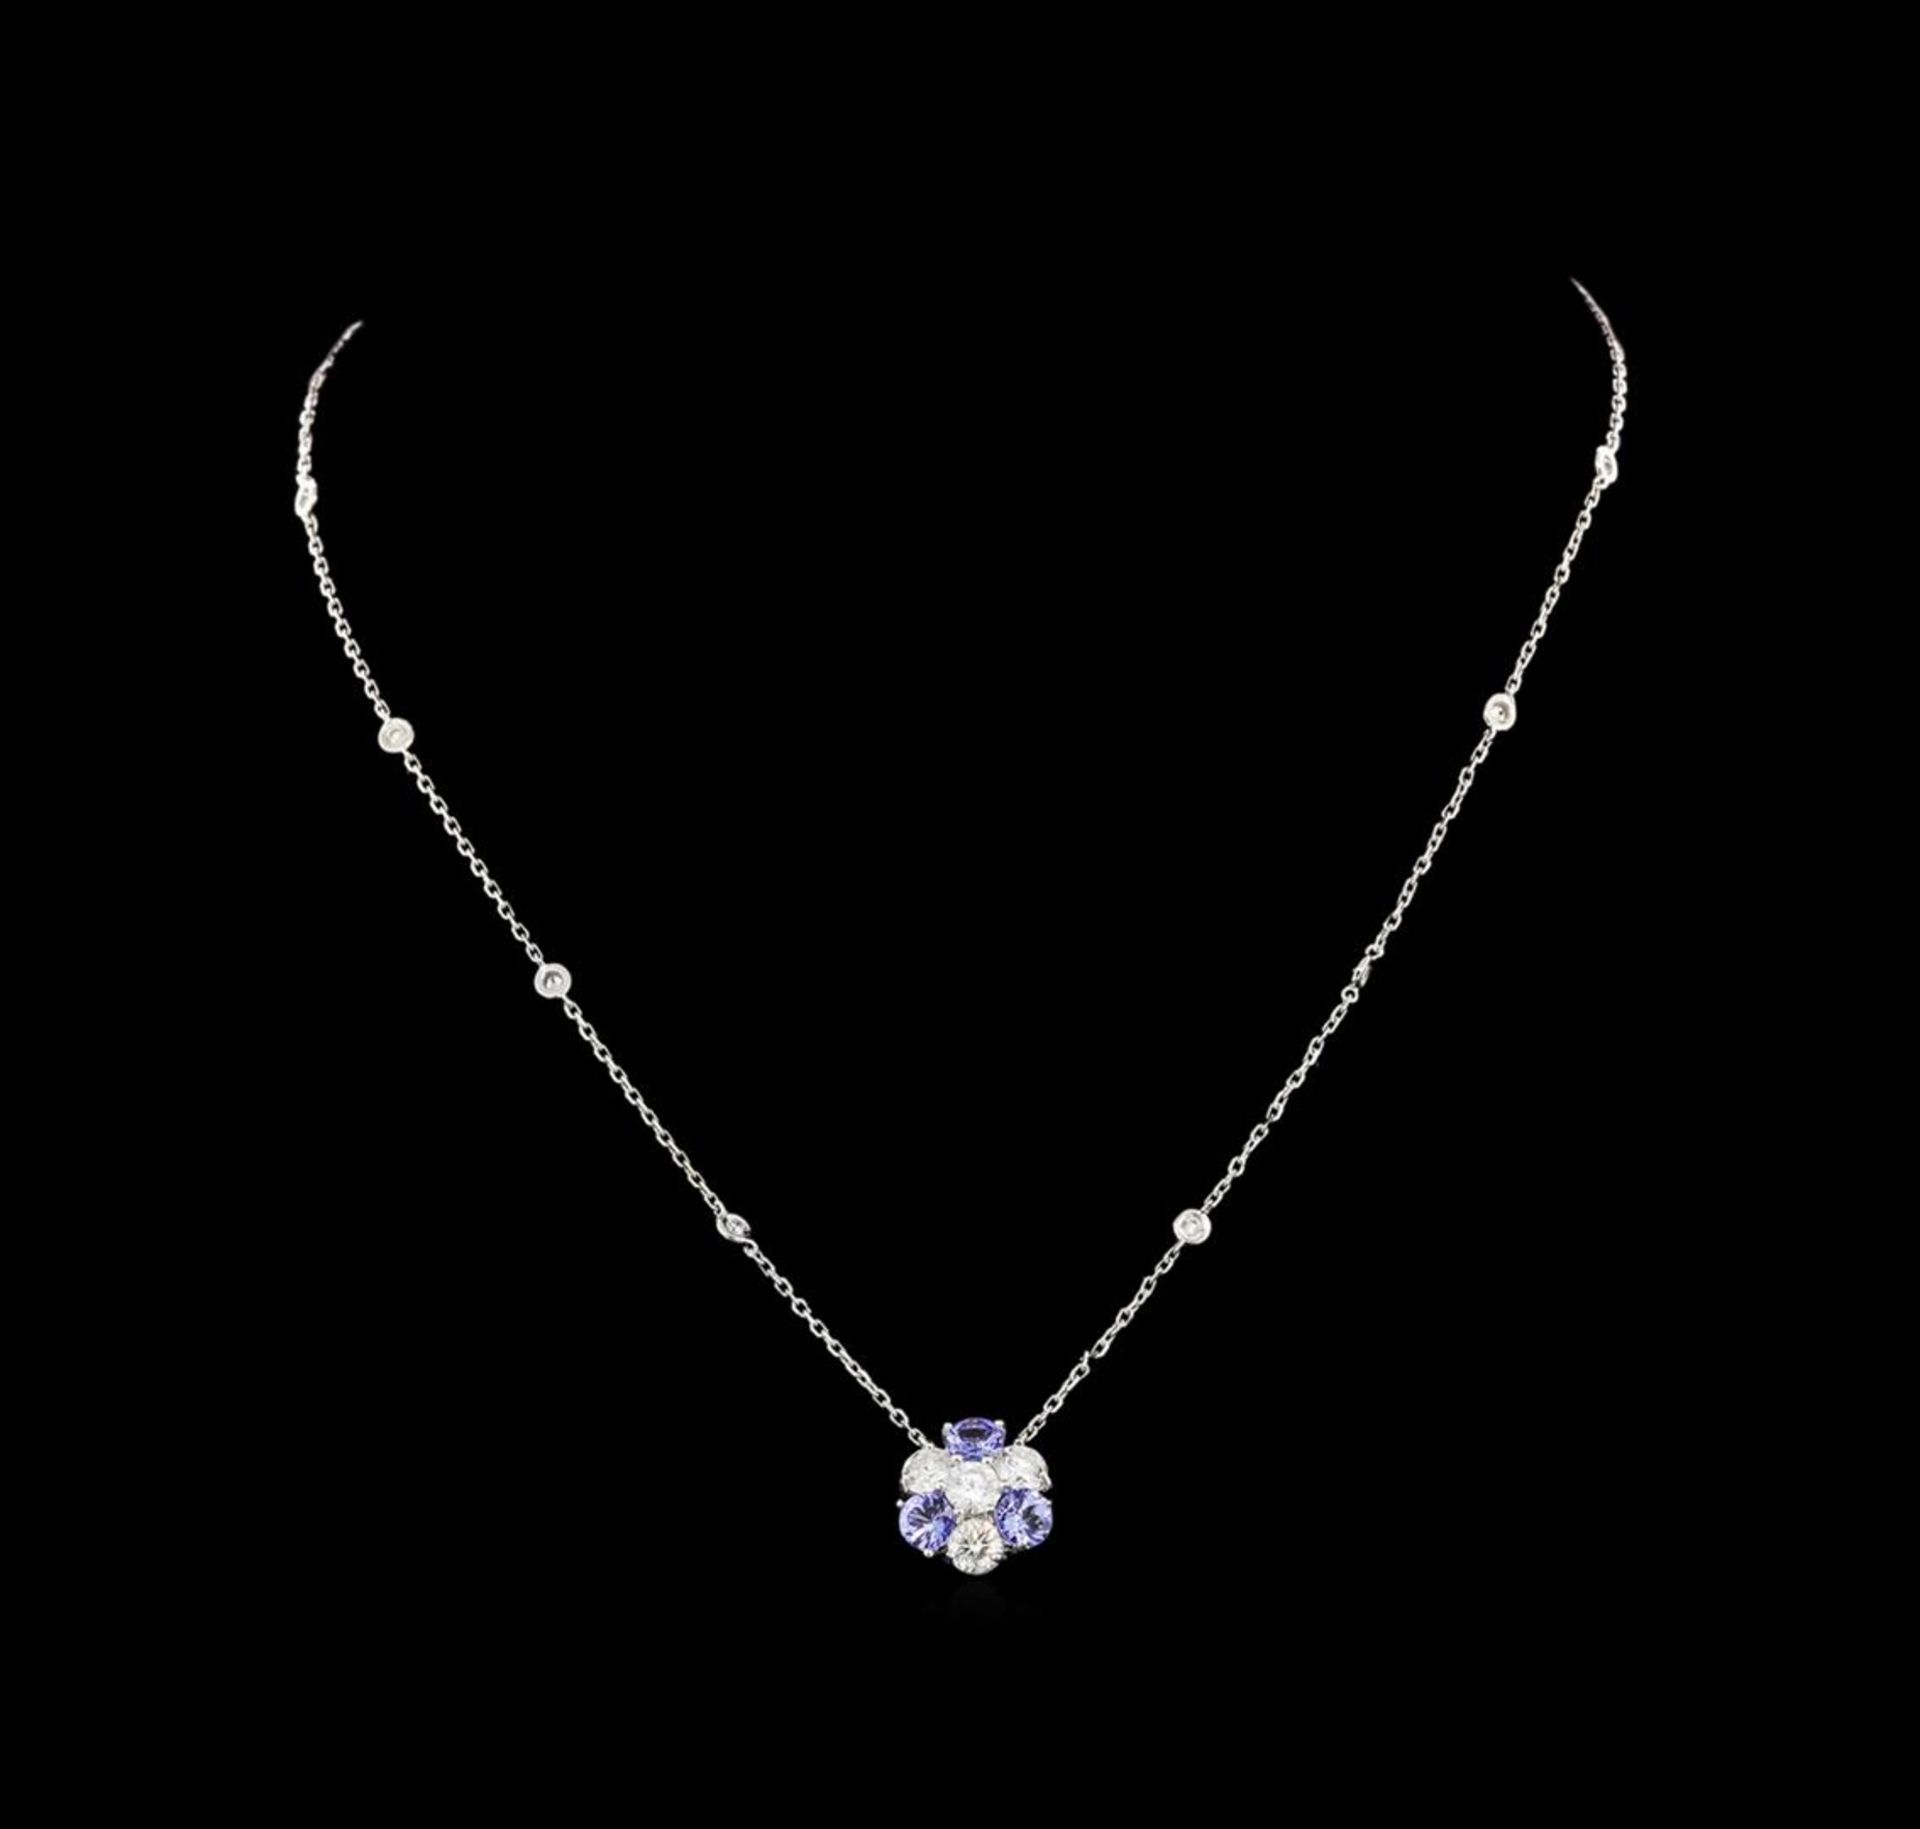 14KT White Gold 1.44 ctw Tanzanite and Diamond Necklace - Image 2 of 3